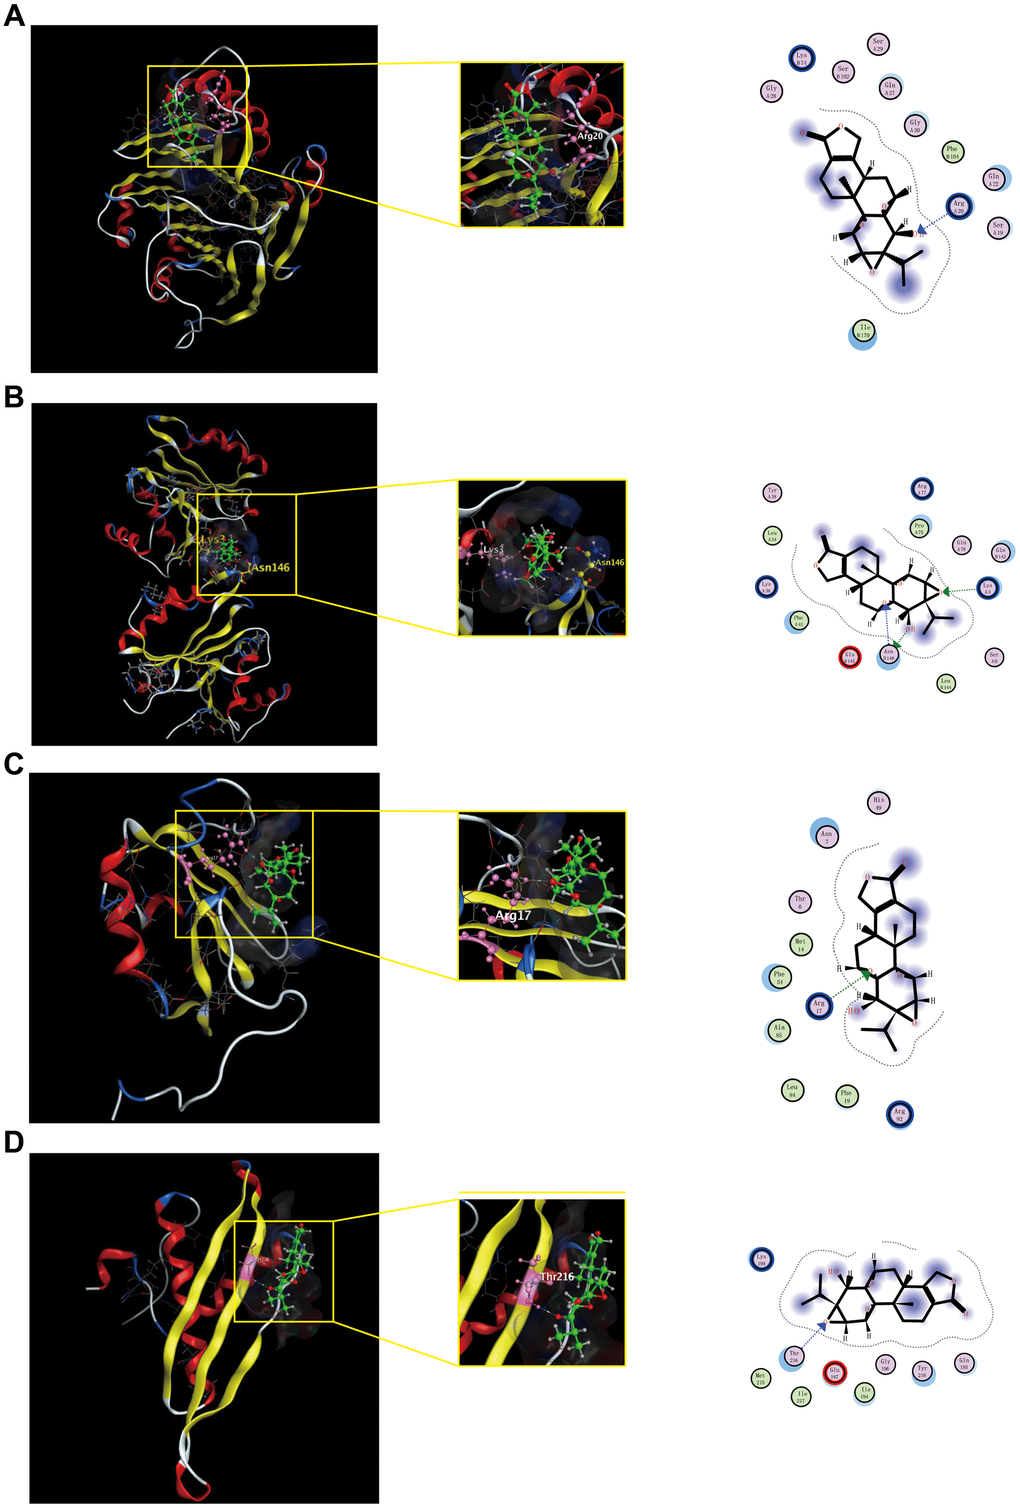 Shows the binding interactions of triptolide with the CRC-related hub genes protein. Triptolide binds to AMD1(A), IMP3(B), HNRNP(C) and DHX9(D). Ball and stick represent triptolide; cartoon represents a hub target.